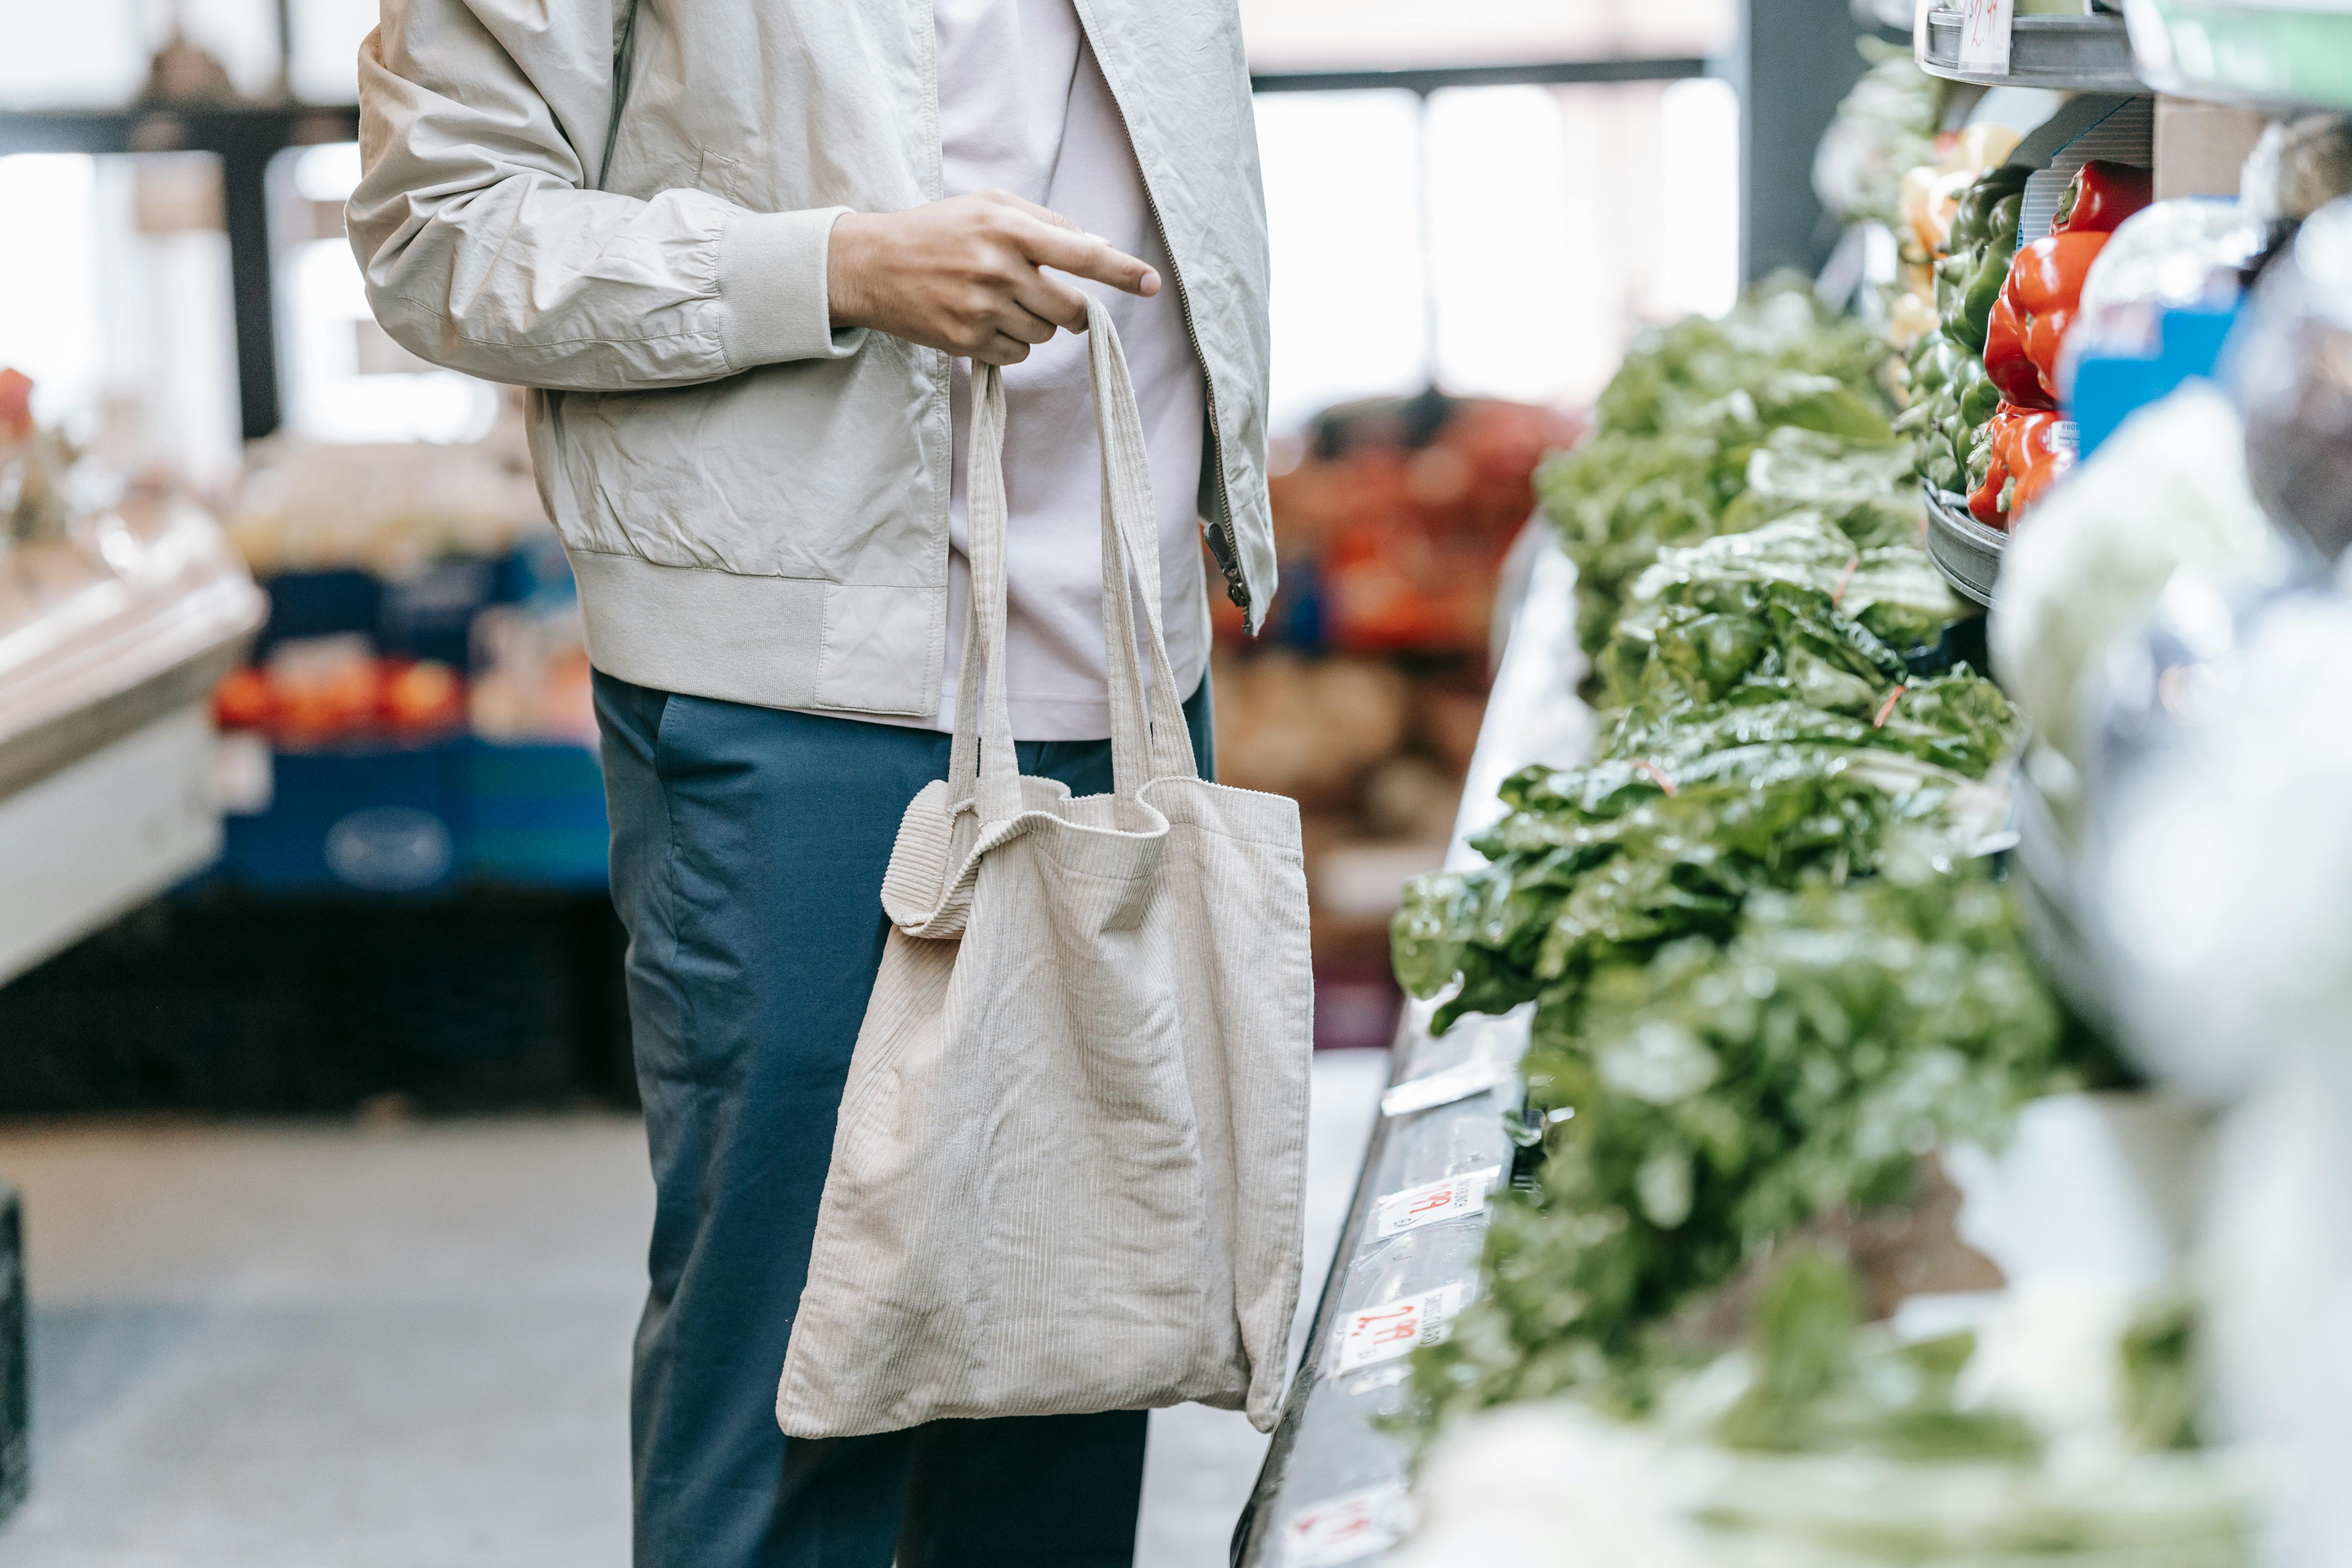 A man holding a shopping back at a grocery store | Source: Pexels